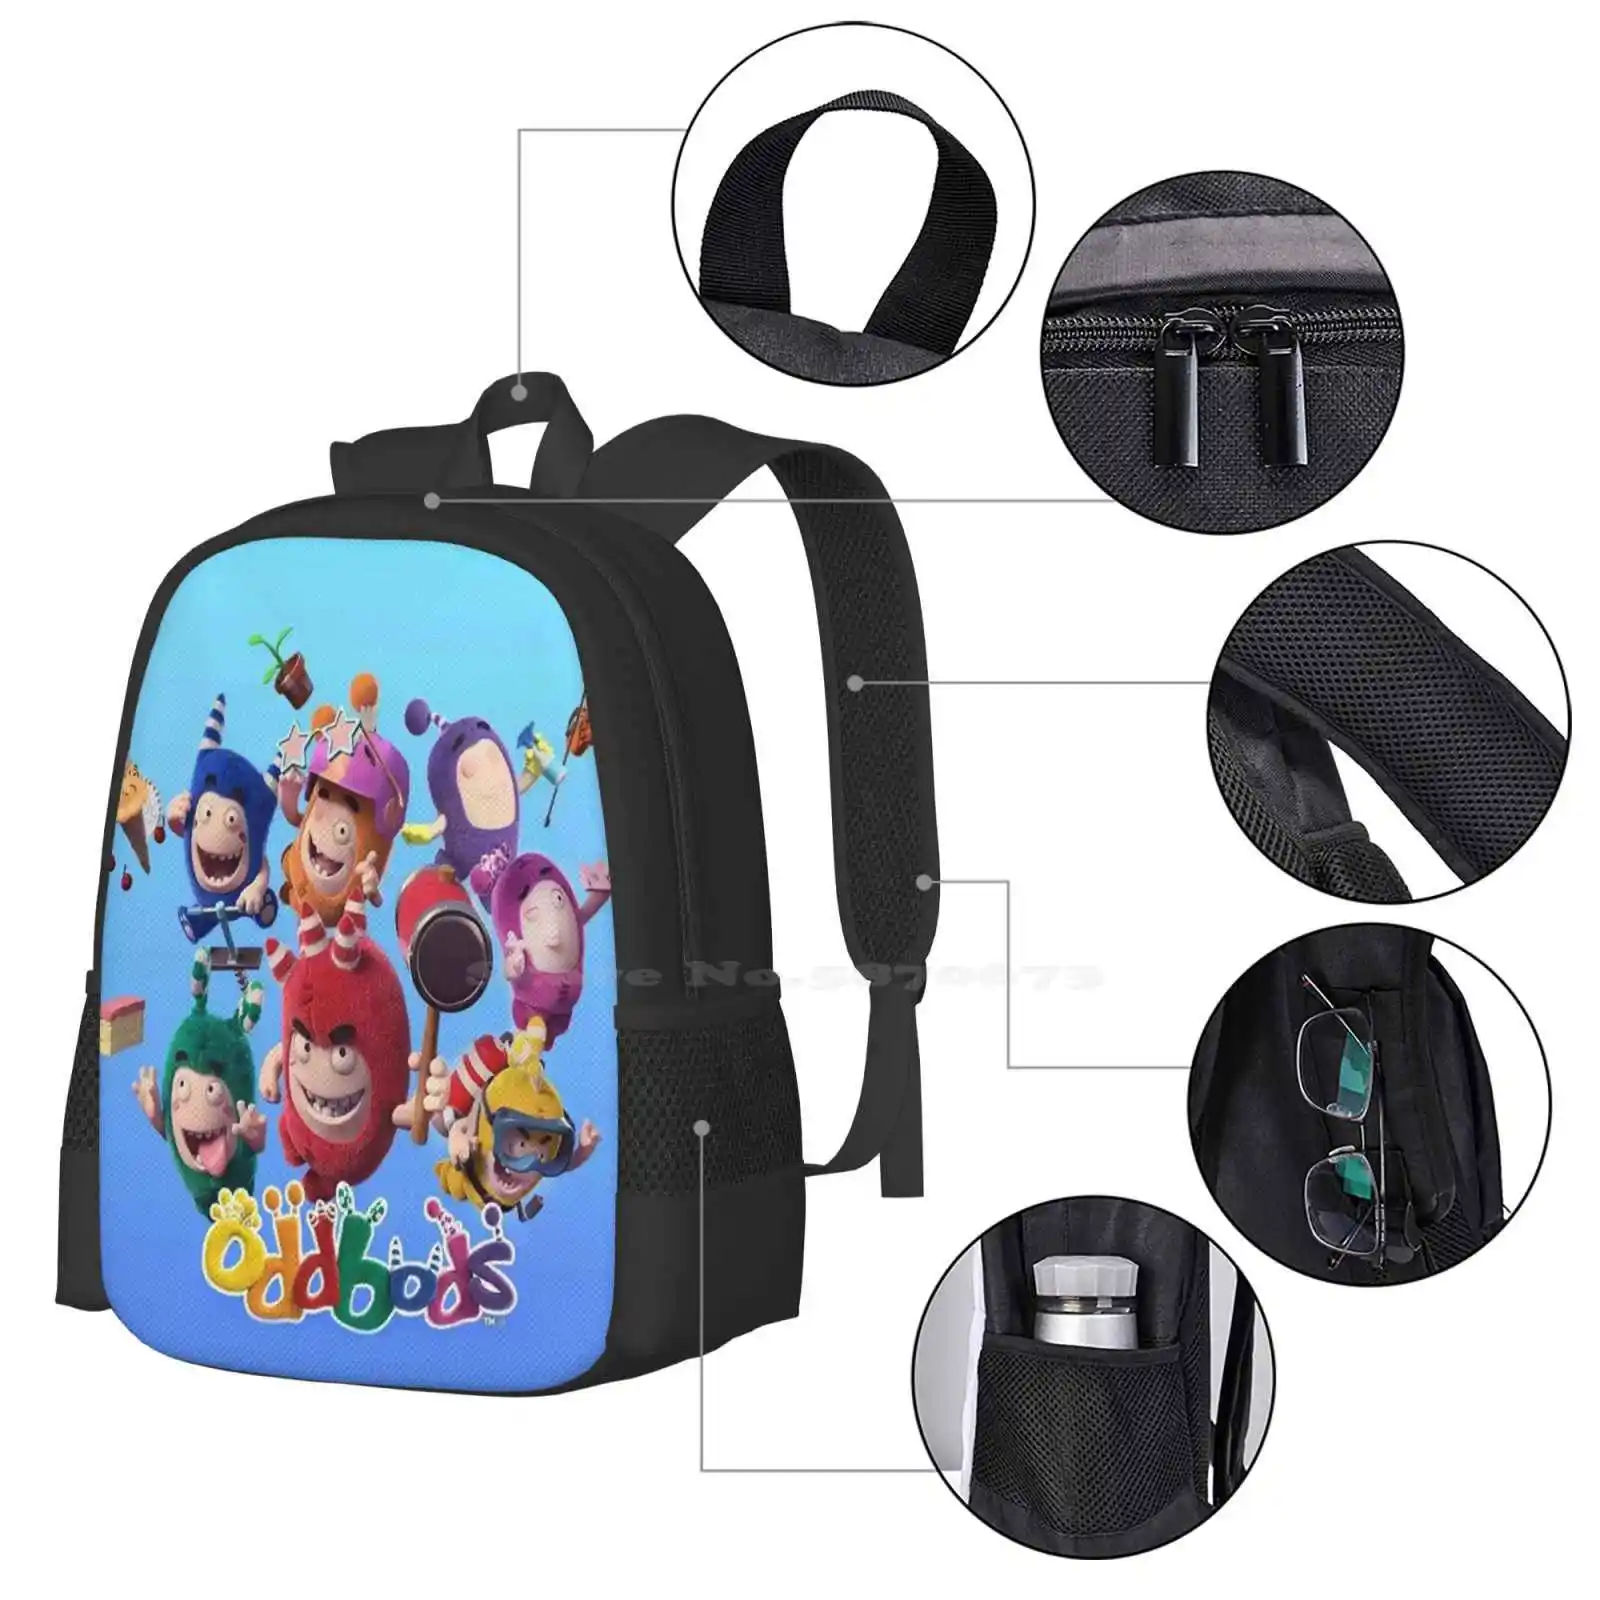 Oddbods Tv Animation 2020 Hot Sale Backpack Fashion Bags Cartoon 2021 Kids Cover Series